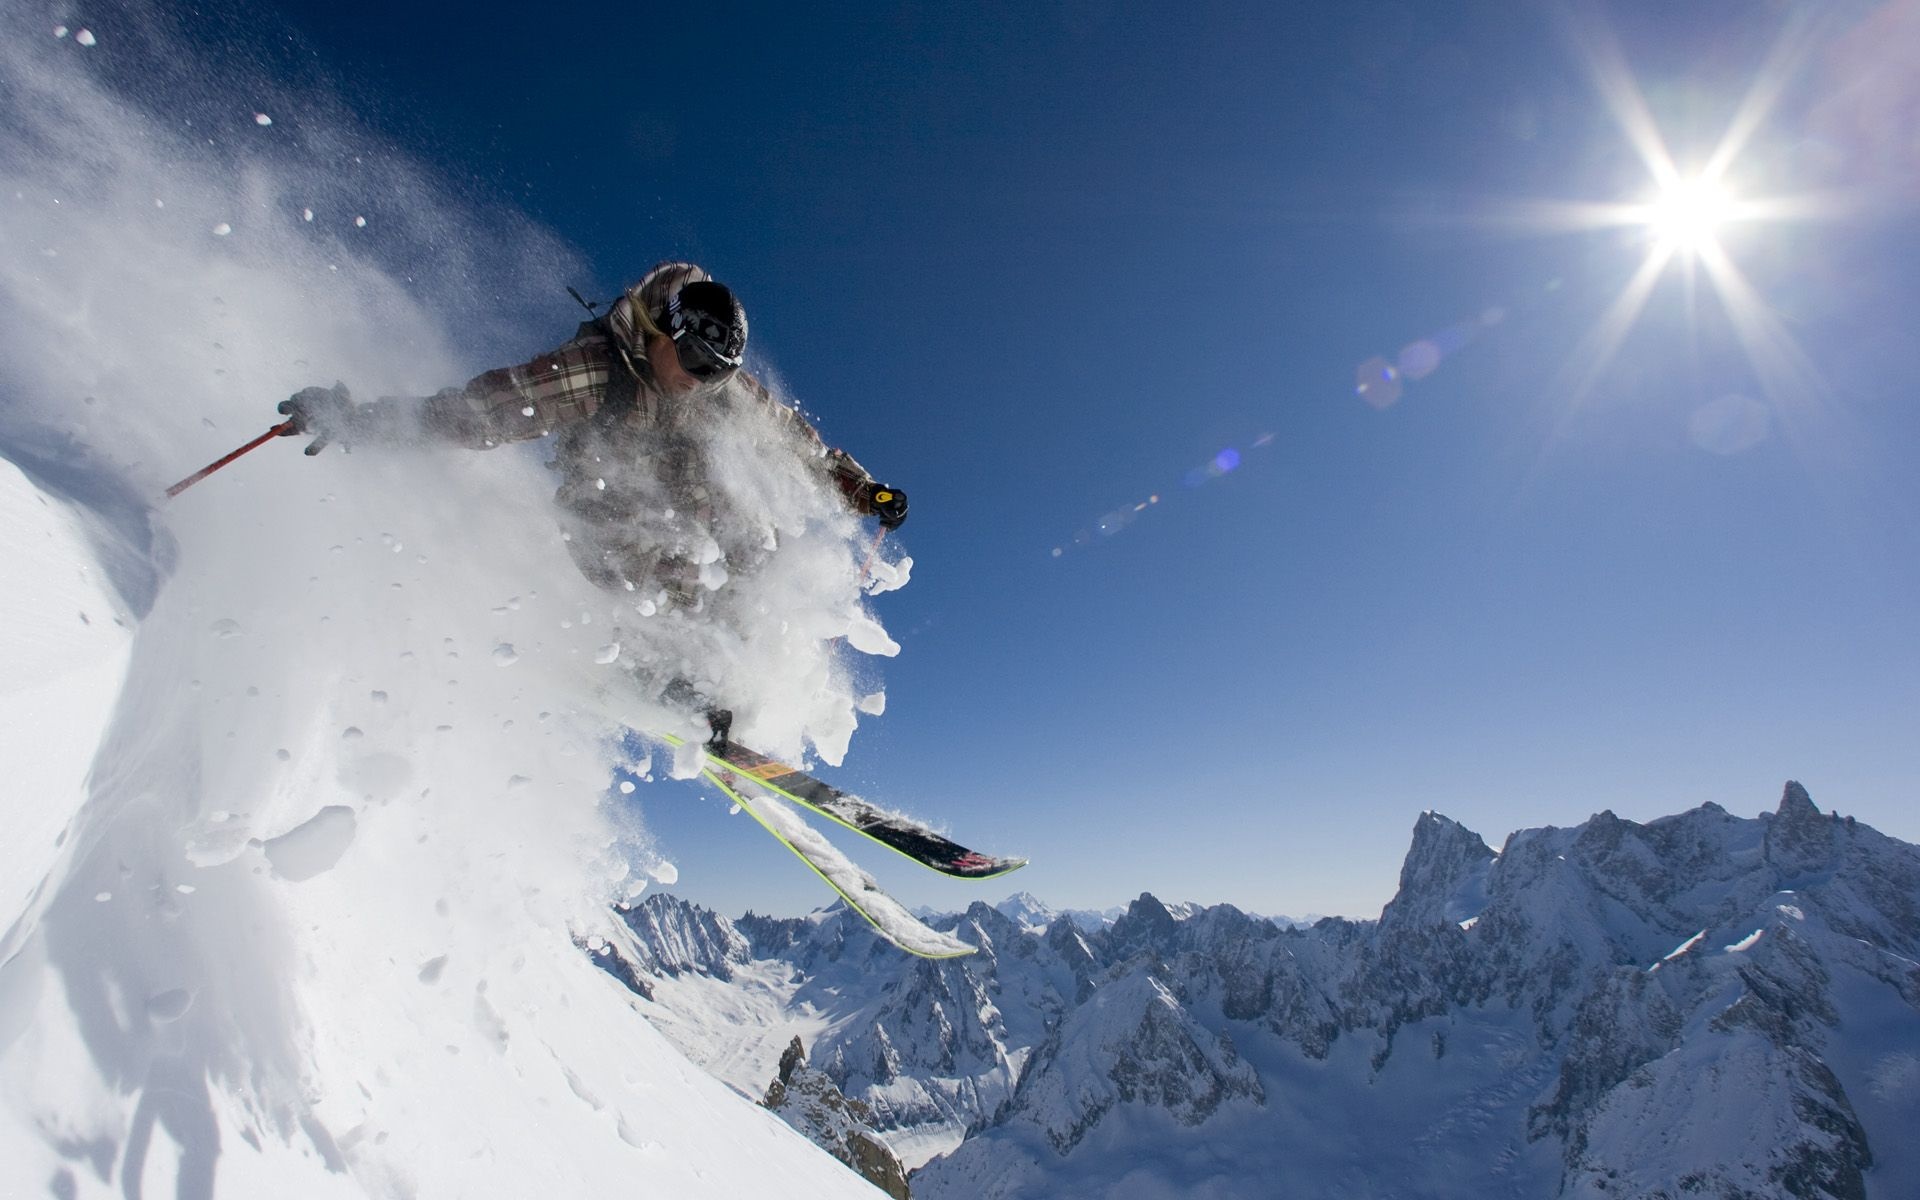 Alpine Skiing: Freestyle Skiing, Gliding on snow, Extreme winter sports, Ski jumping. 1920x1200 HD Background.